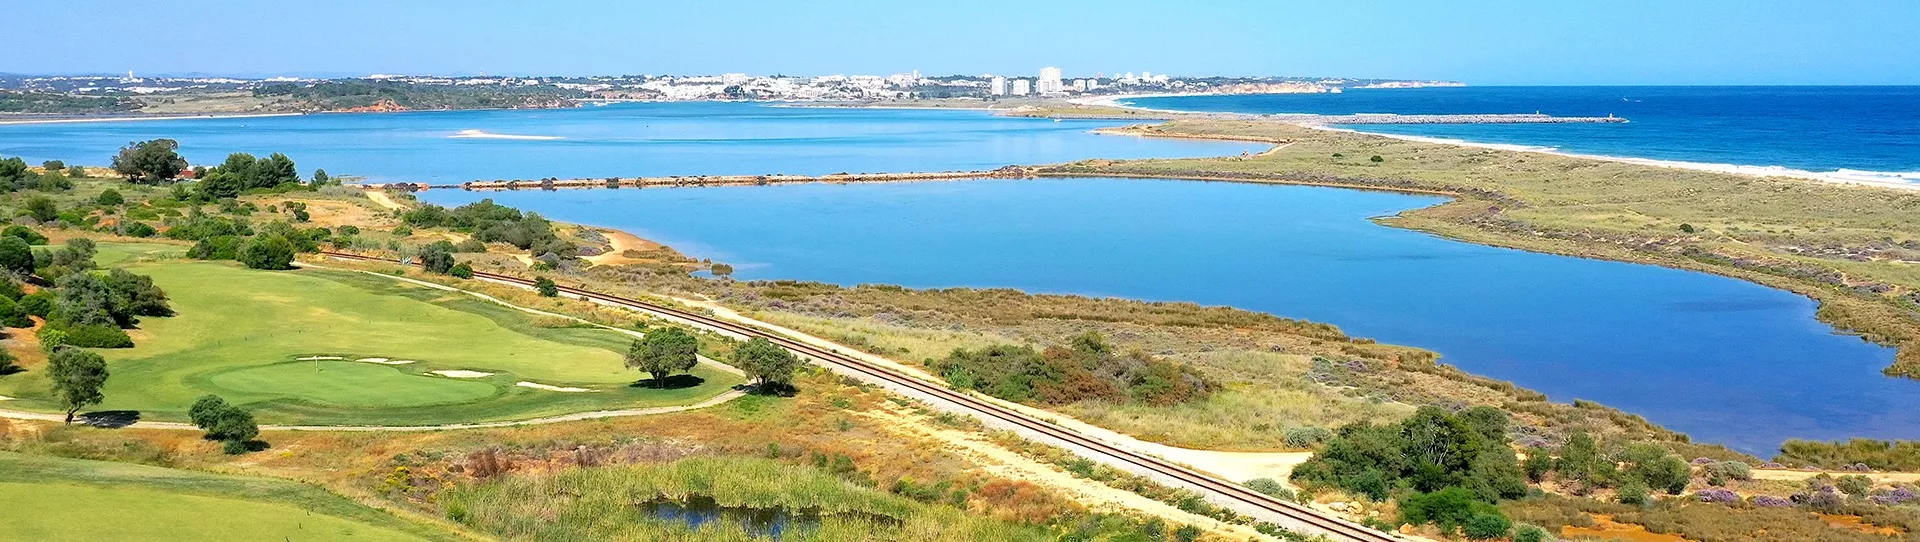 Portugal golf holidays - Palmares Duo Experience - Photo 1